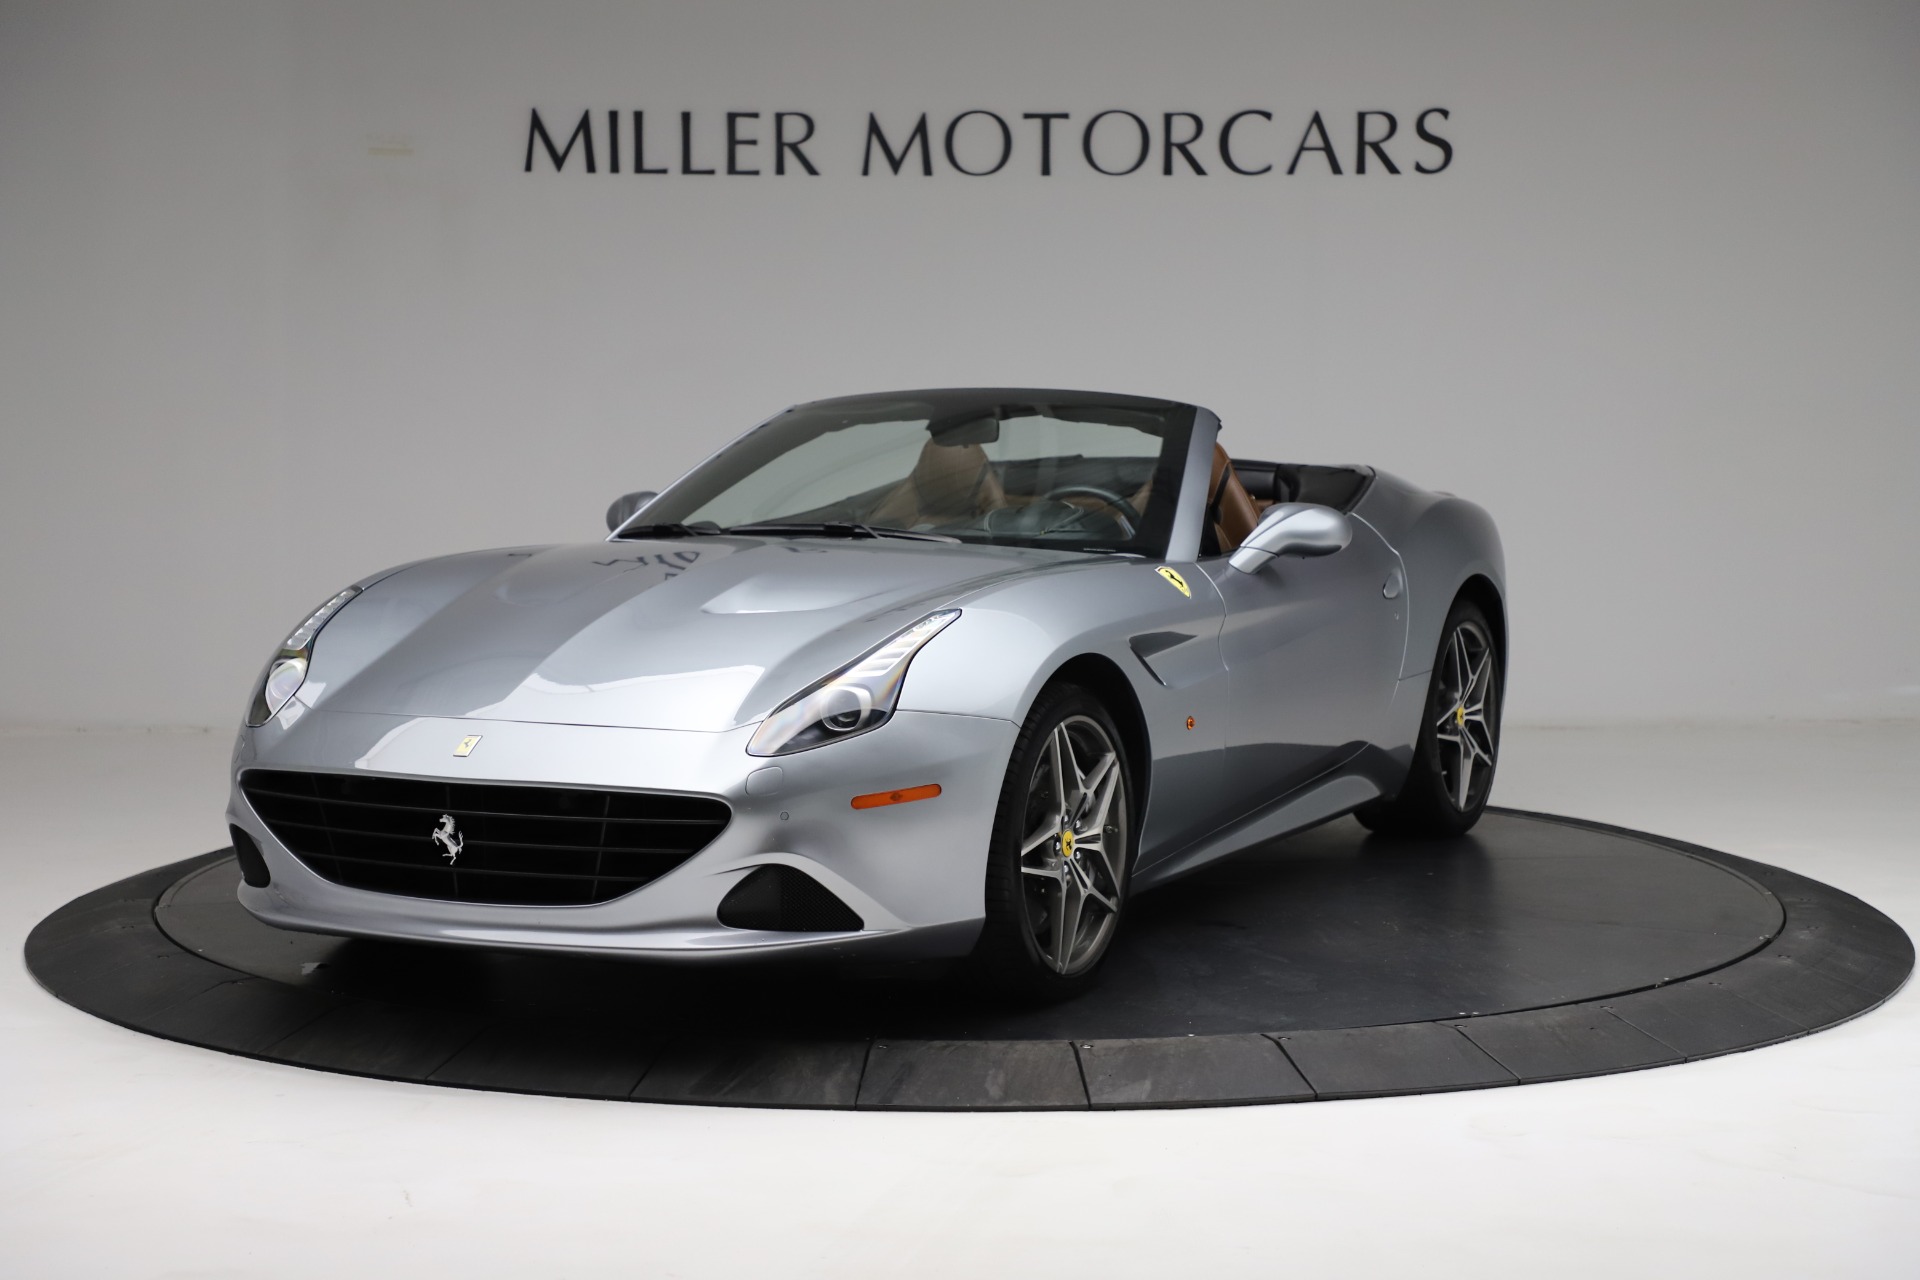 Used 2017 Ferrari California T for sale Sold at Rolls-Royce Motor Cars Greenwich in Greenwich CT 06830 1